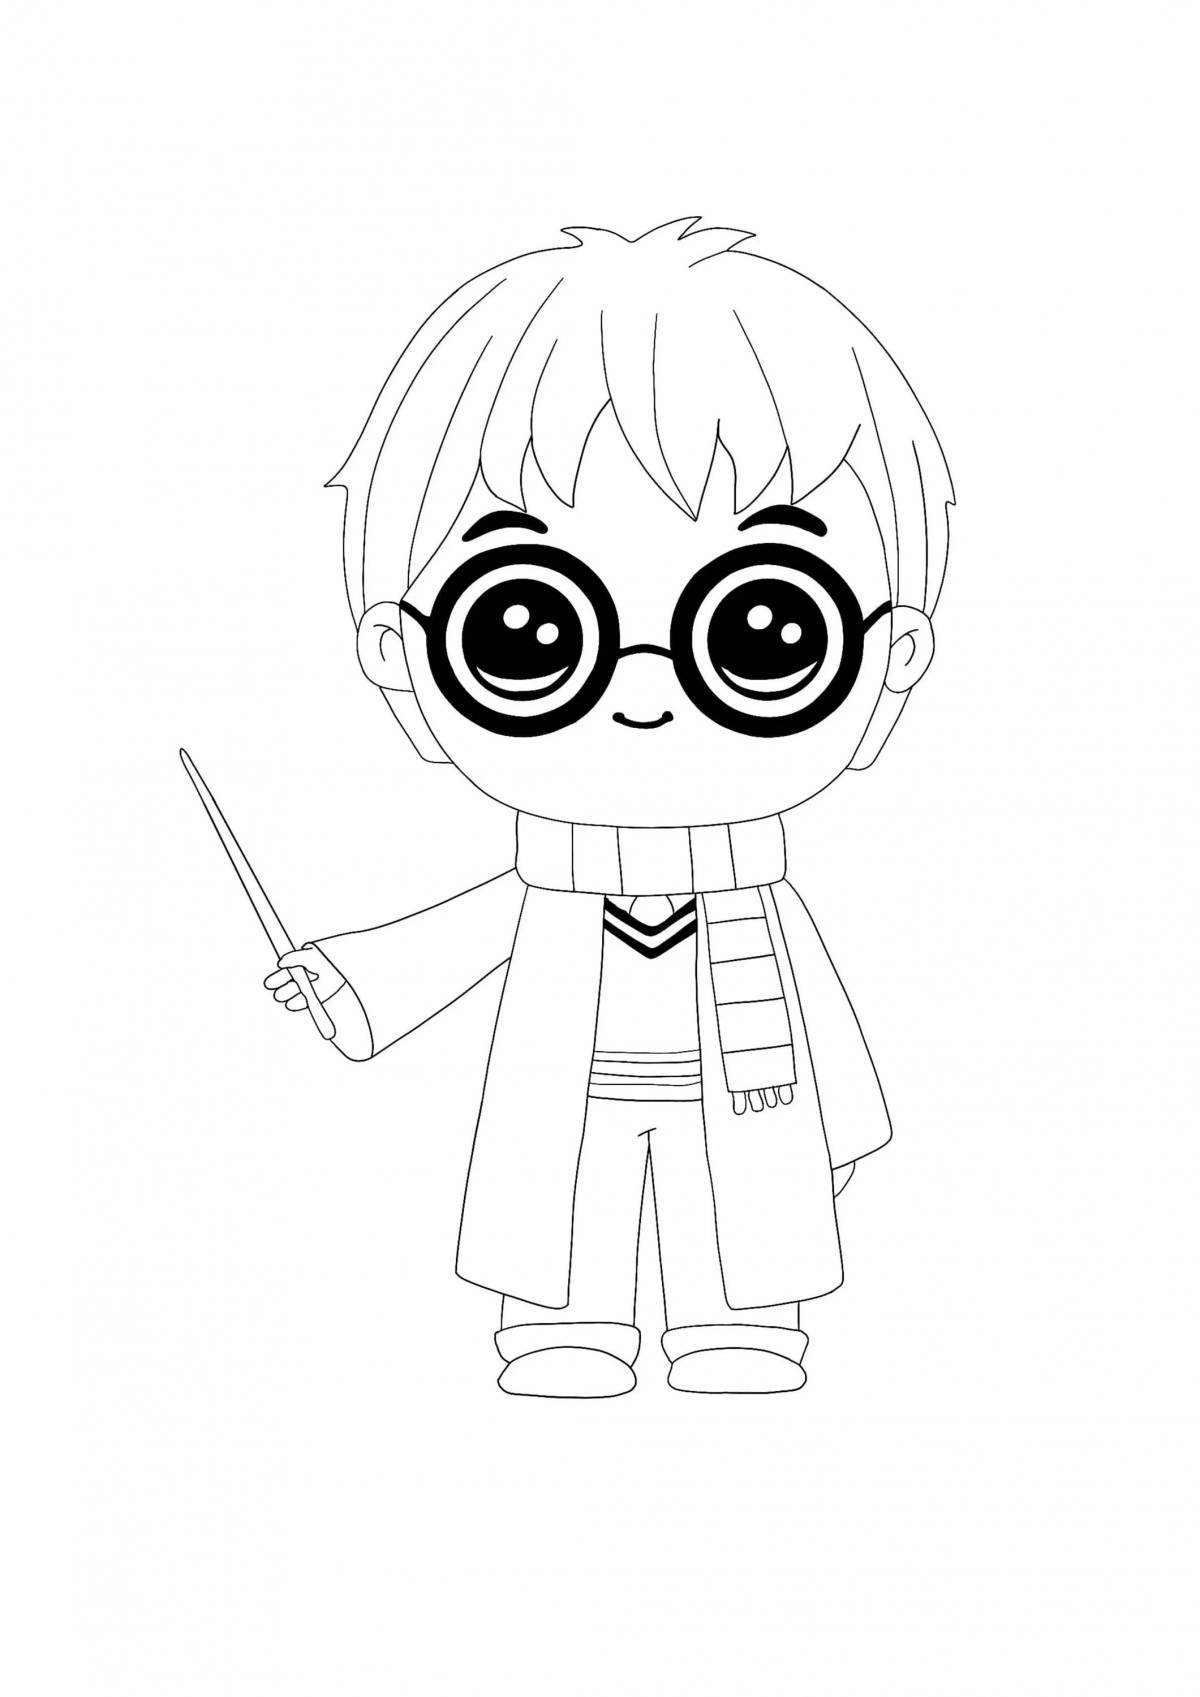 Coloring dreamy harry potter